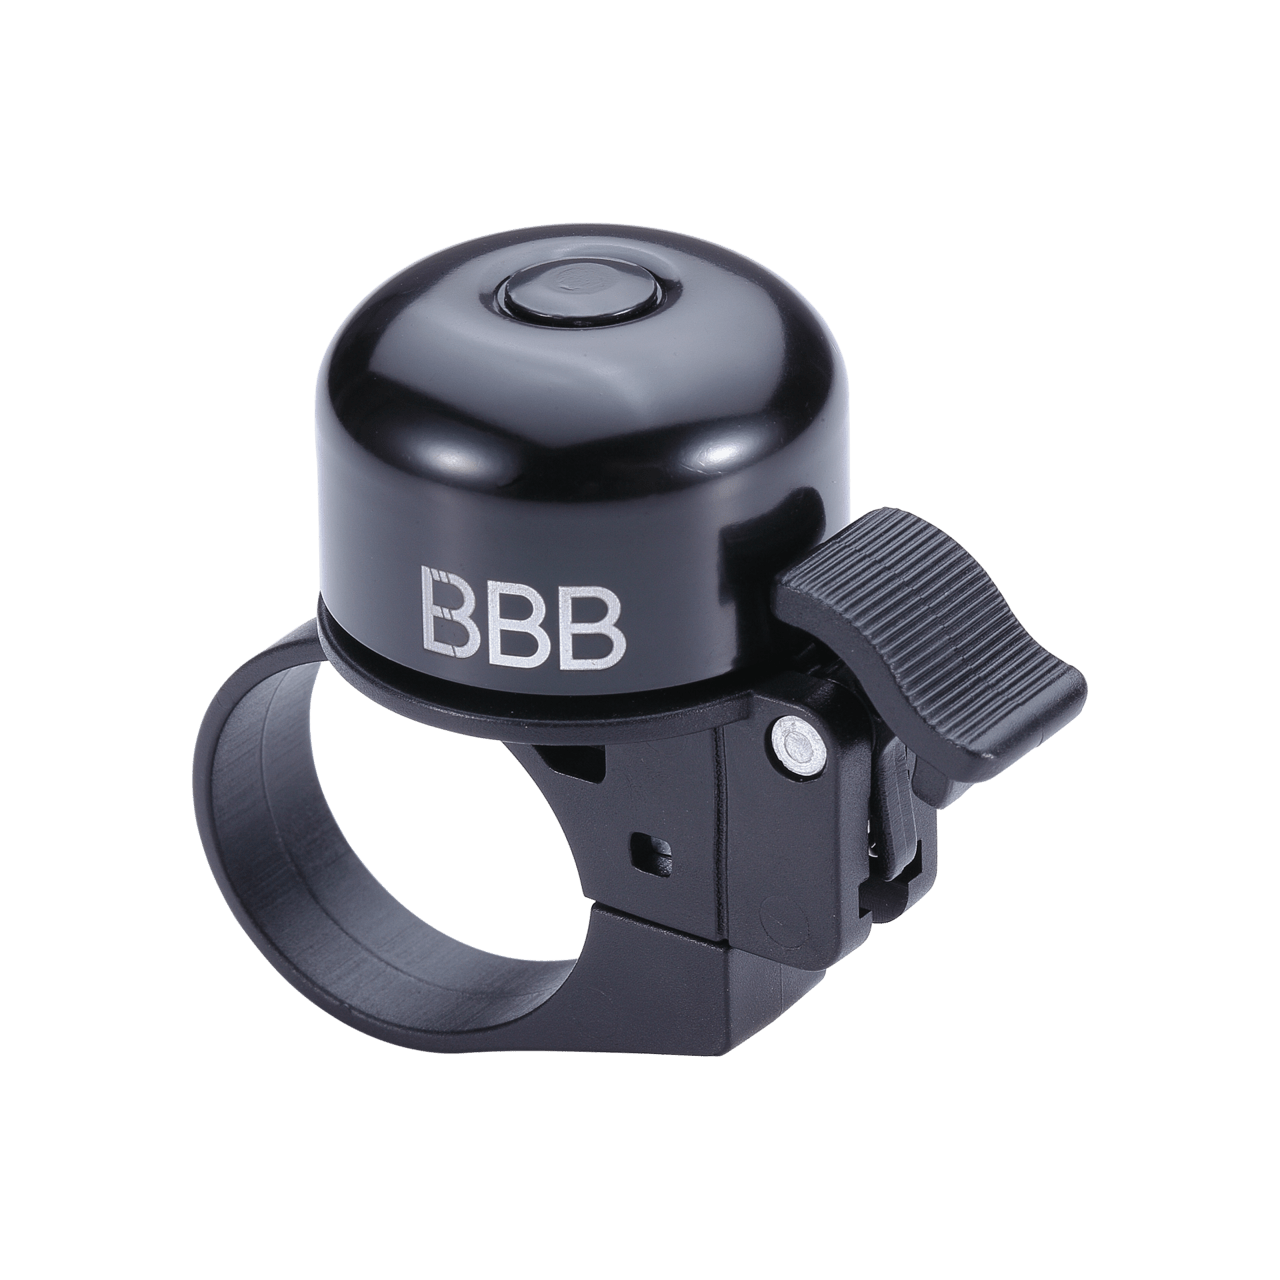 BBB Cycling BBB-11 bicycle bell